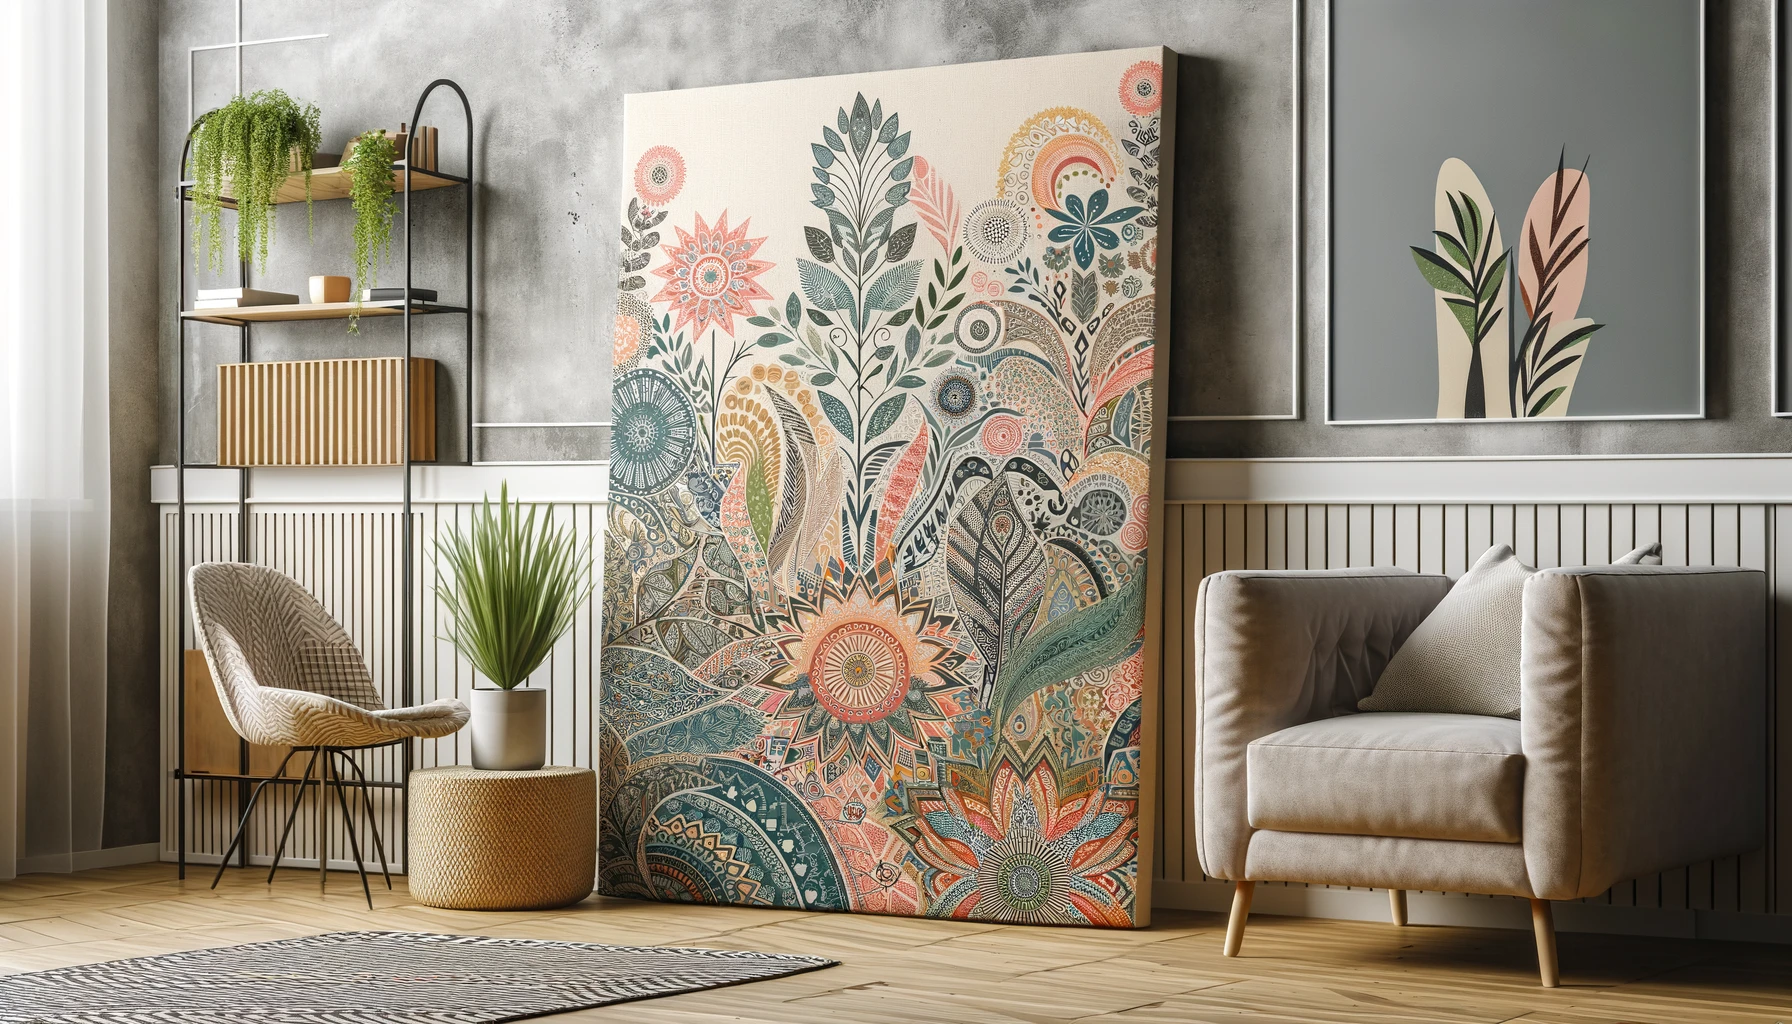 a stylish and vibrant piece of DIY boho wall art made from accent wallpaper. The wallpaper features intricate botanical prints or geometric designs, applied to a large canvas or wooden board, framed, and displayed in a modern living room setting. This artwork creates a colorful and textured focal point, enhancing the room's cozy and chic ambiance.